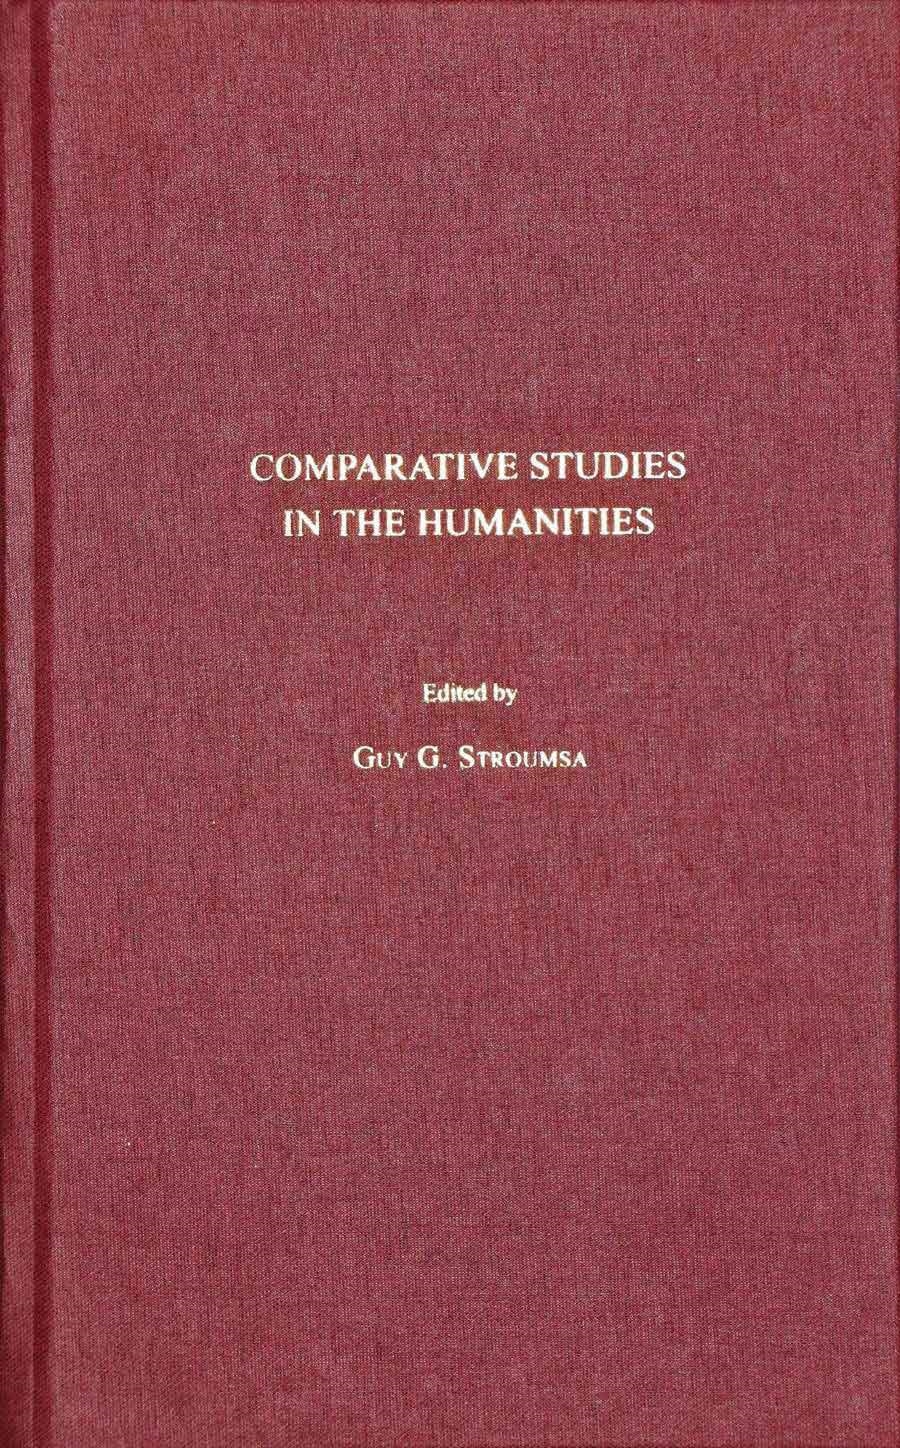 Comparative Studies in the Humanities